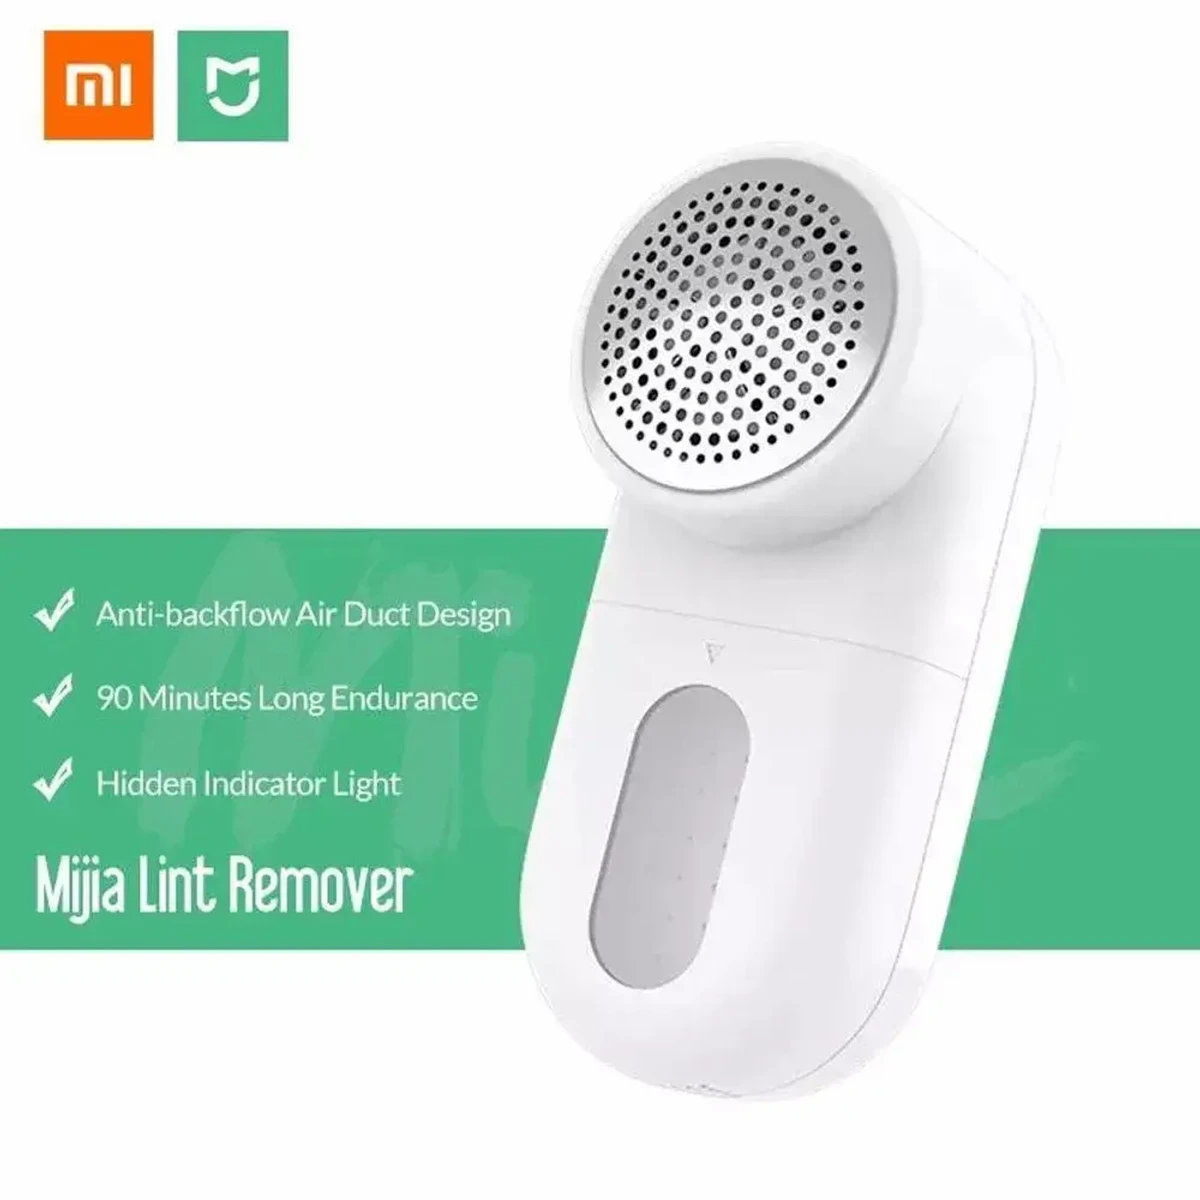 XIAOMI MIJIA Lint Remover Cutters Portable Charge Fabric Clothes Fuzz Pellet Trimmer Machine from Spools Cutting